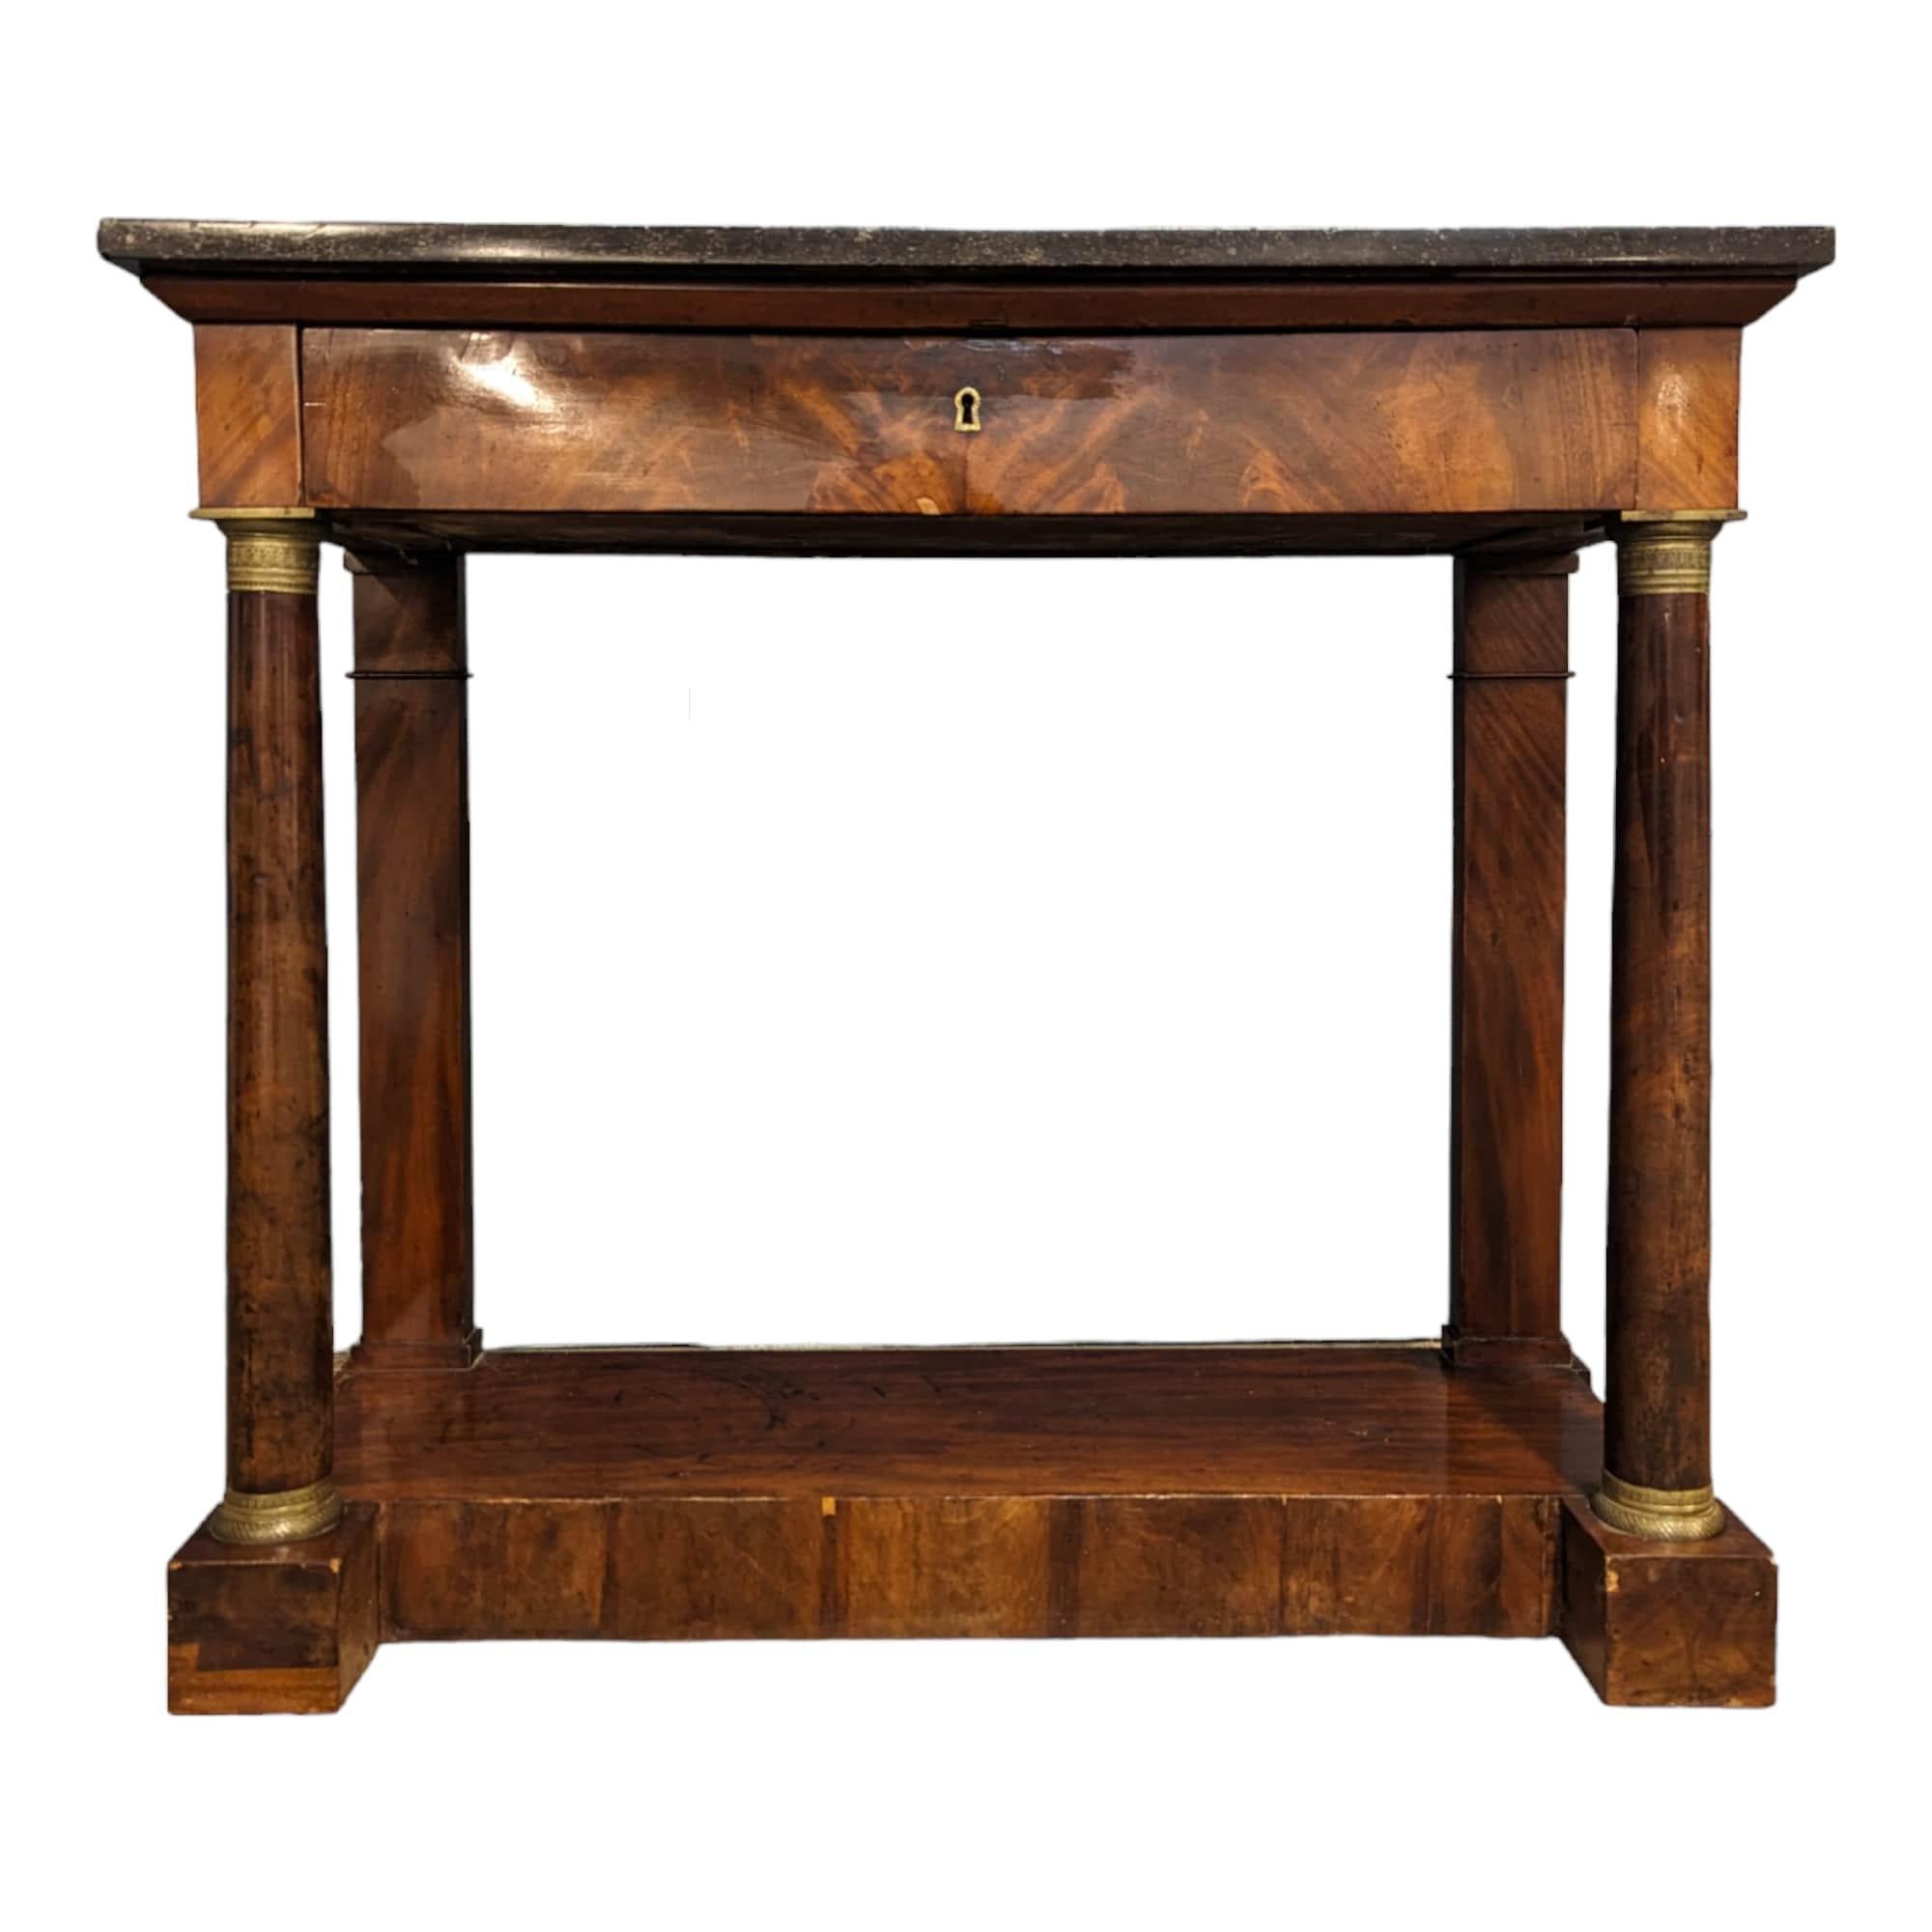 Coming from France. Add a touch of imperial grandeur to your home with this stunning Empire-style mahogany console table, a piece that evokes the opulence and majesty of the Napoleonic era.

Crafted from mahogany, a precious wood often associated